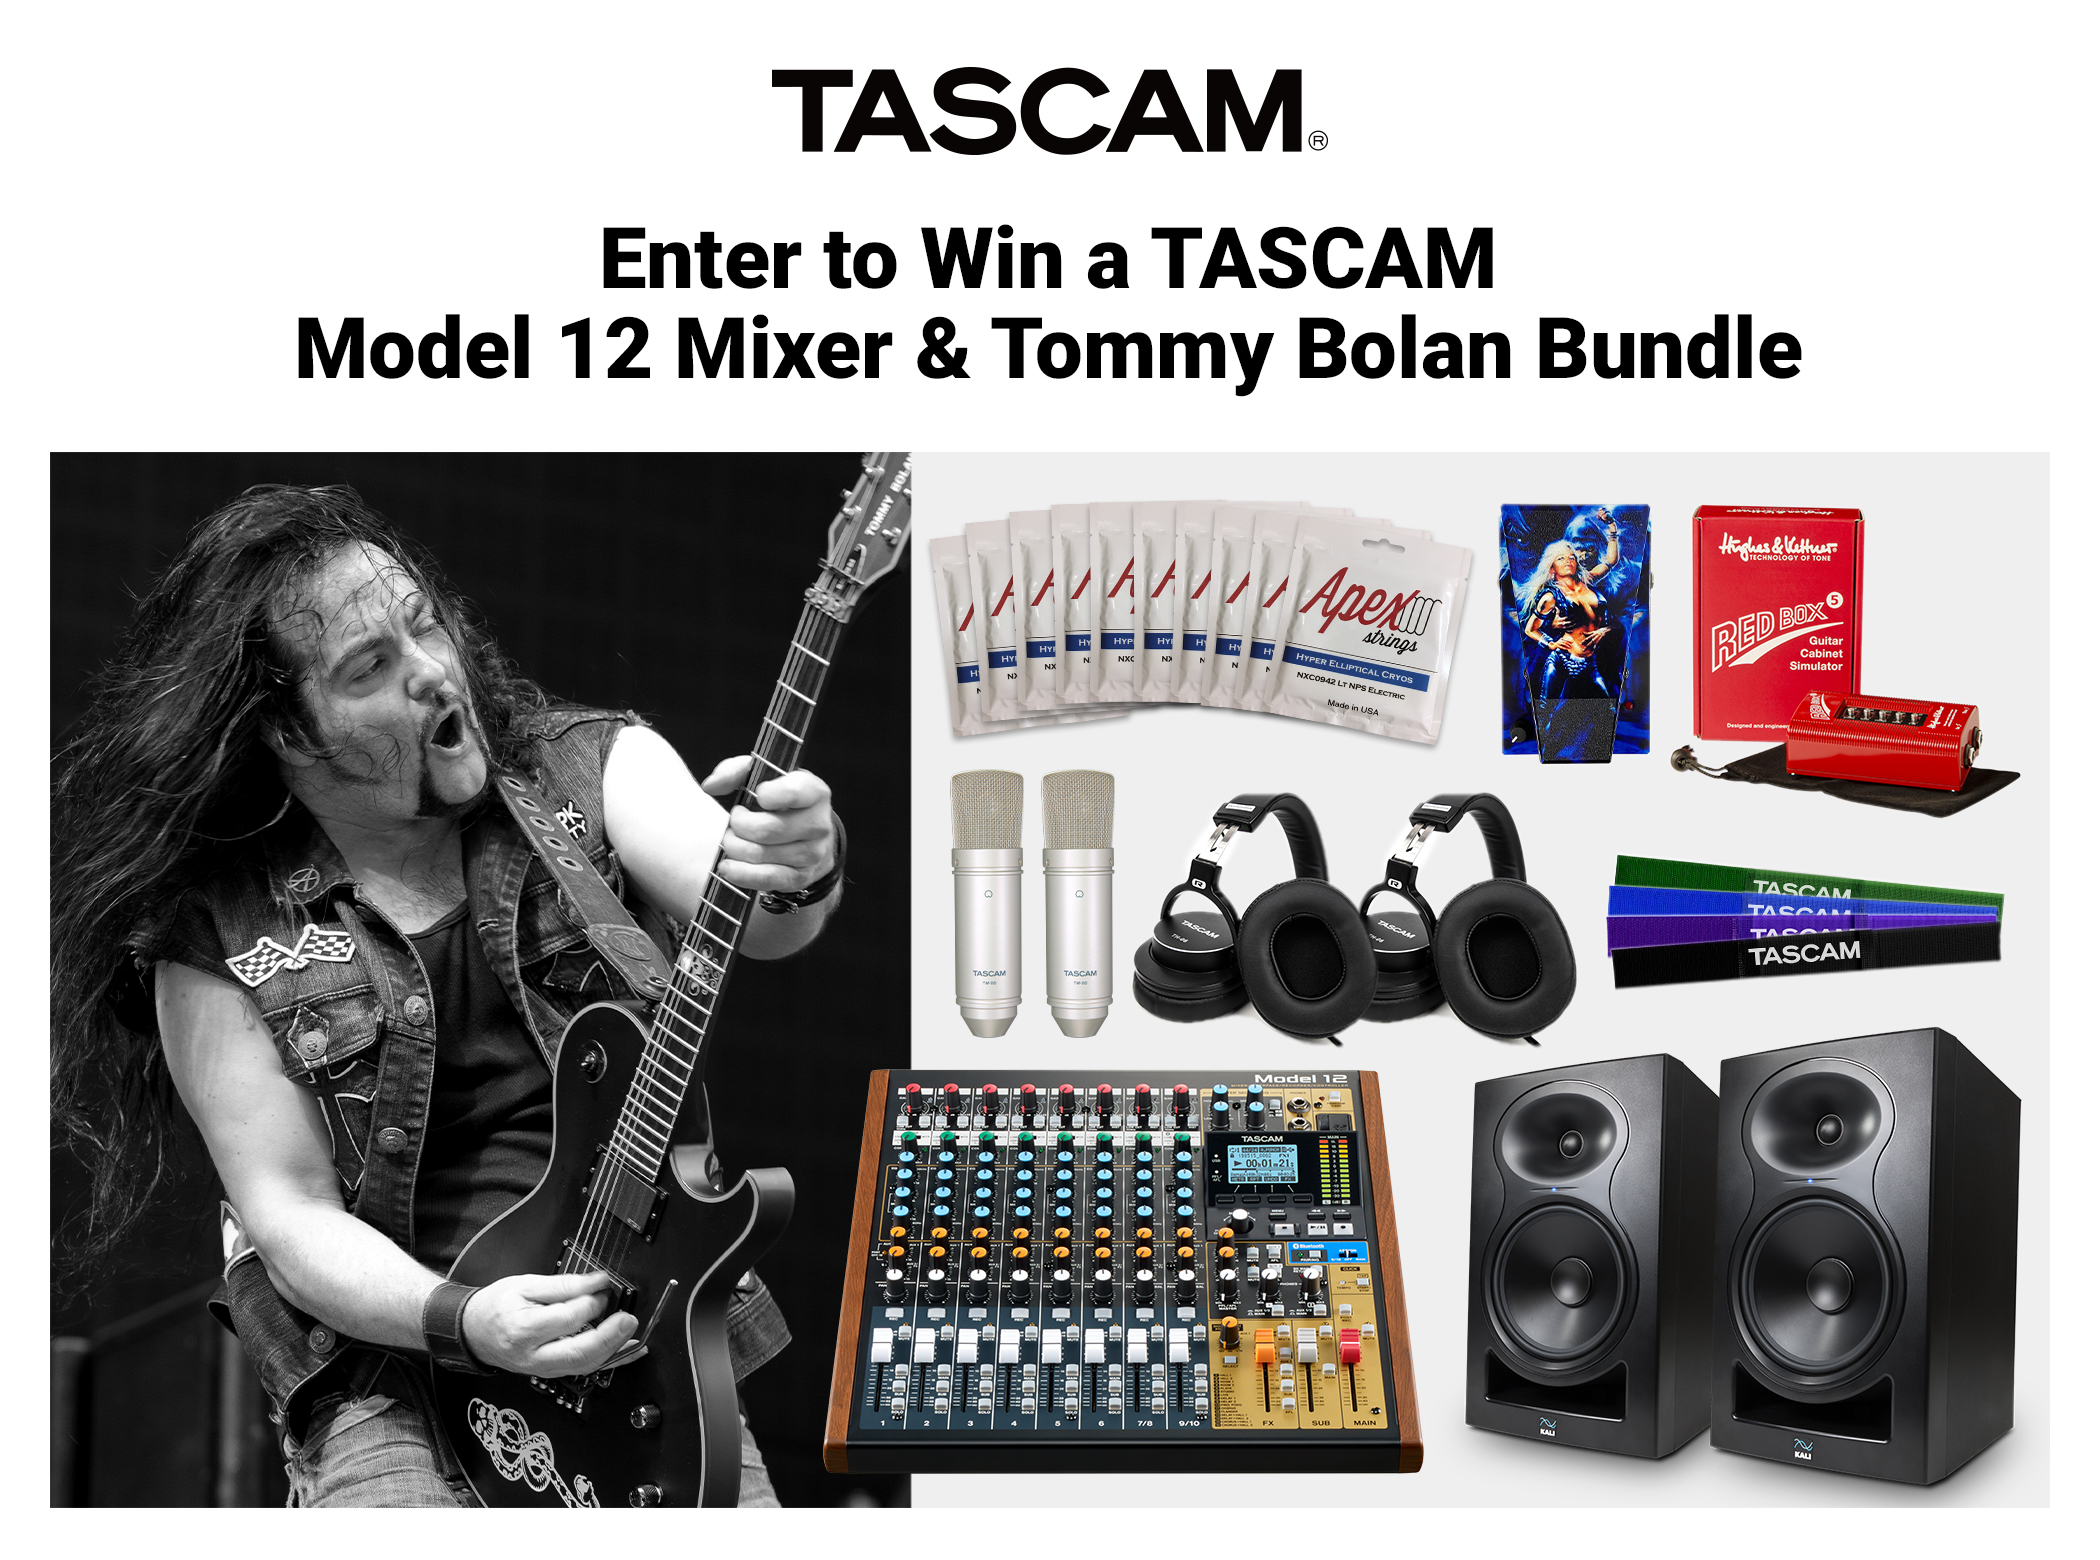 TASCAM Announces the TASCAM & Tommy Bolan Recording and Guitar Gear Giveaway Contest